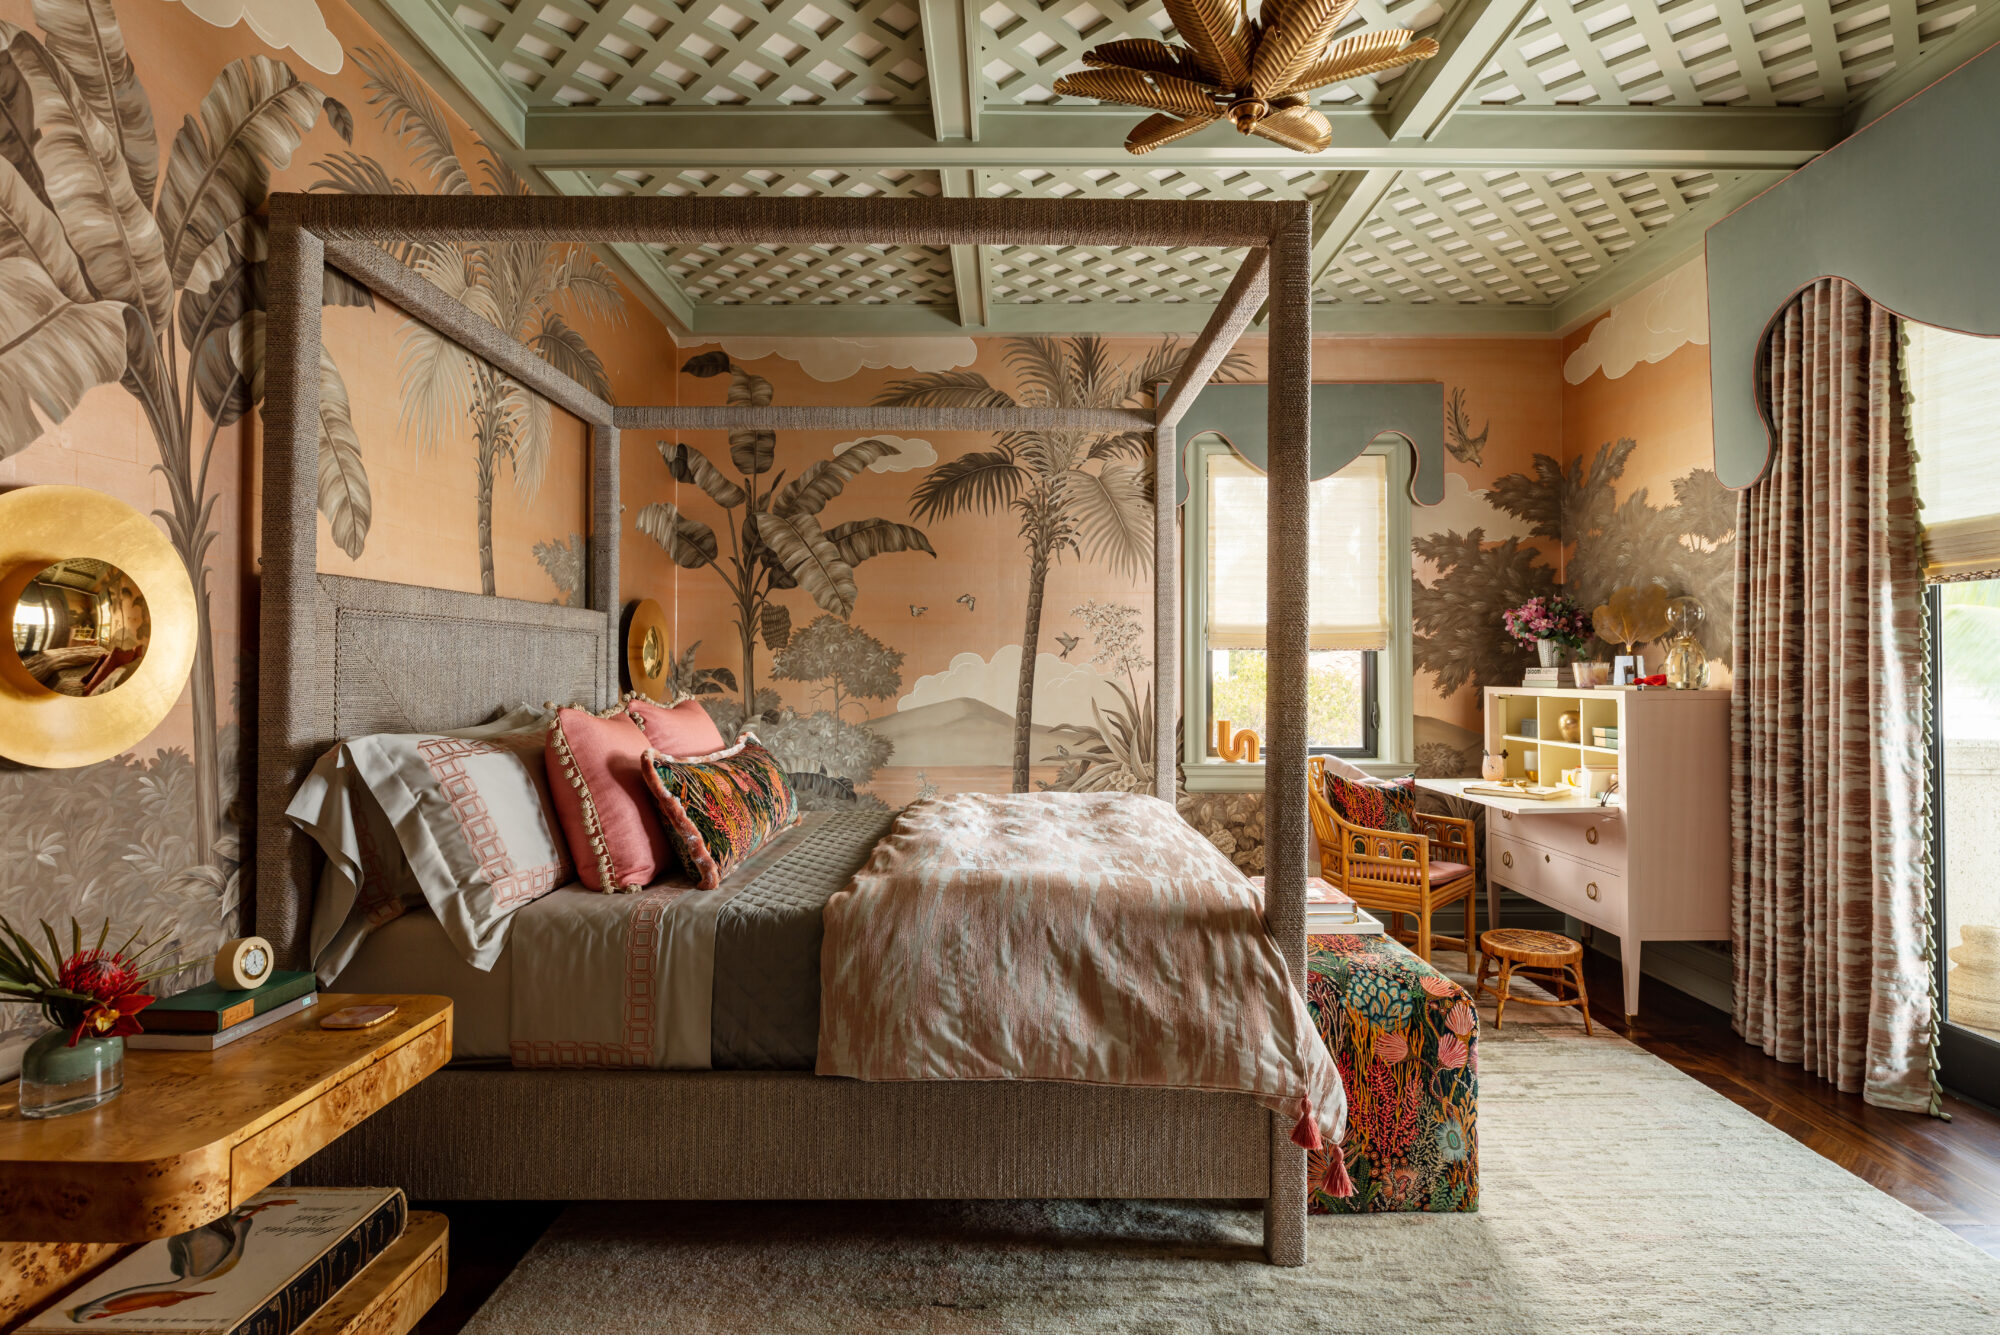 jungle-inspired bedroom with palm-tree inspired wallpaper and chandelier